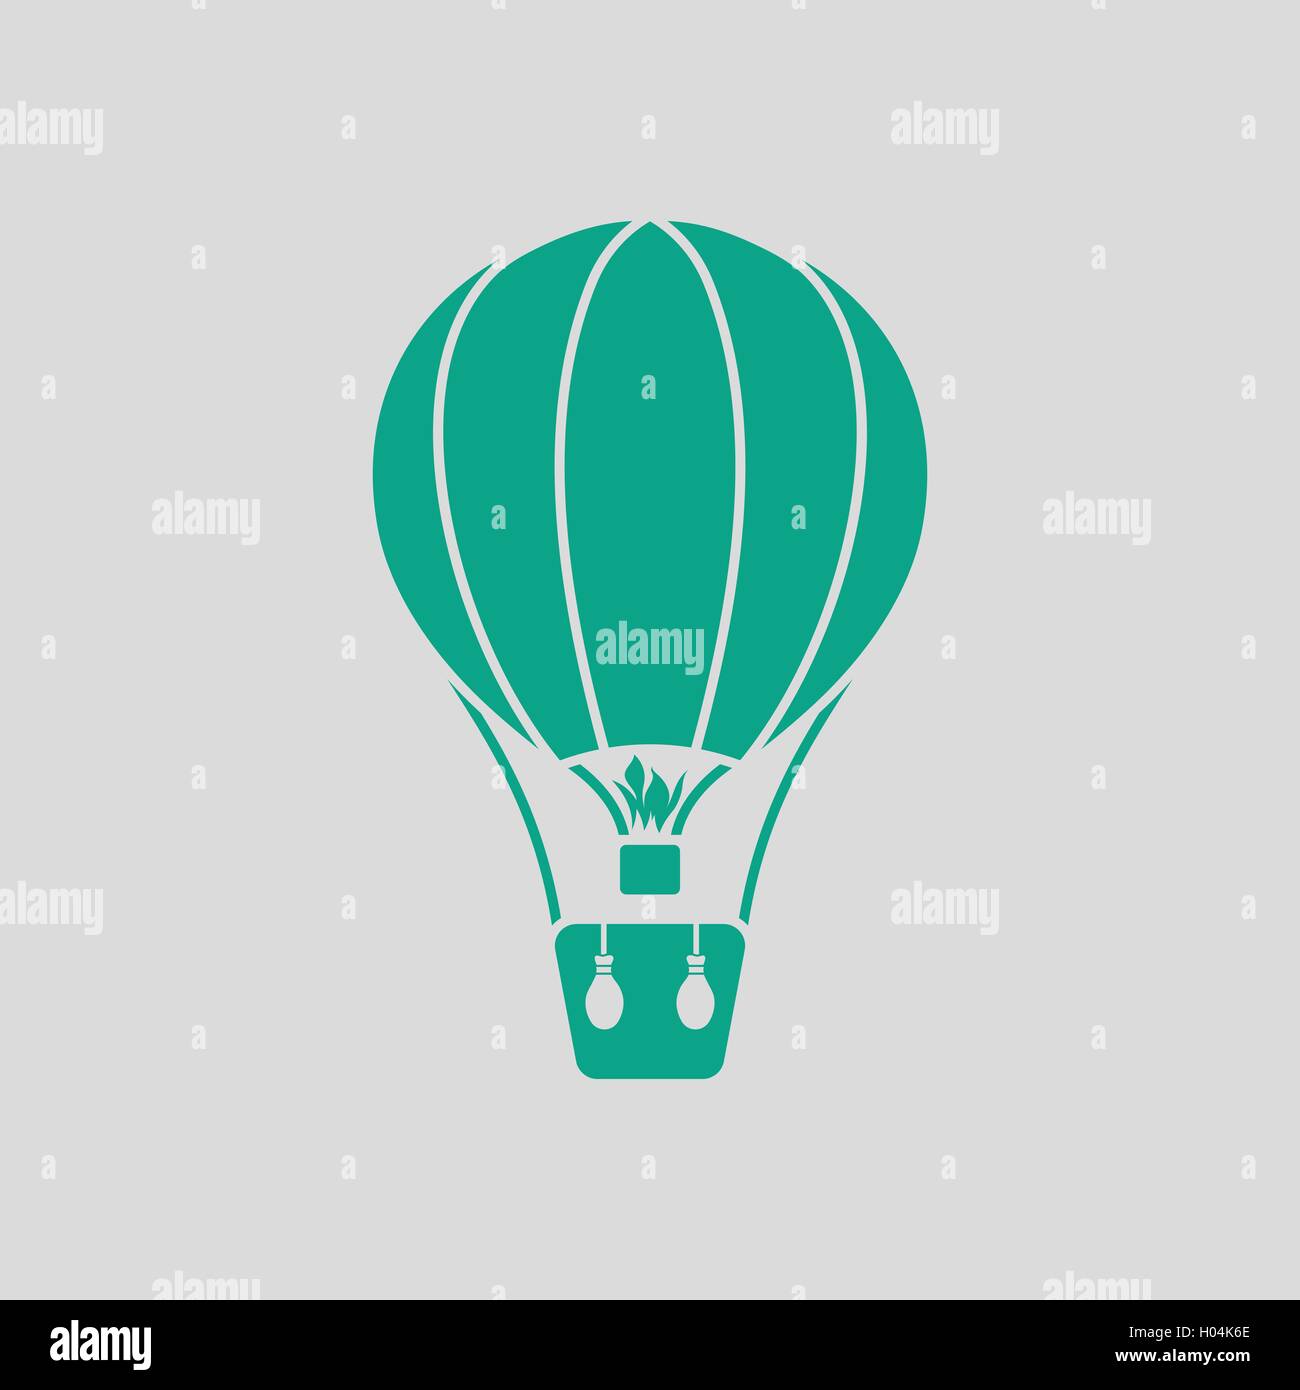 Hot air balloon icon. Gray background with green. Vector illustration. Stock Vector